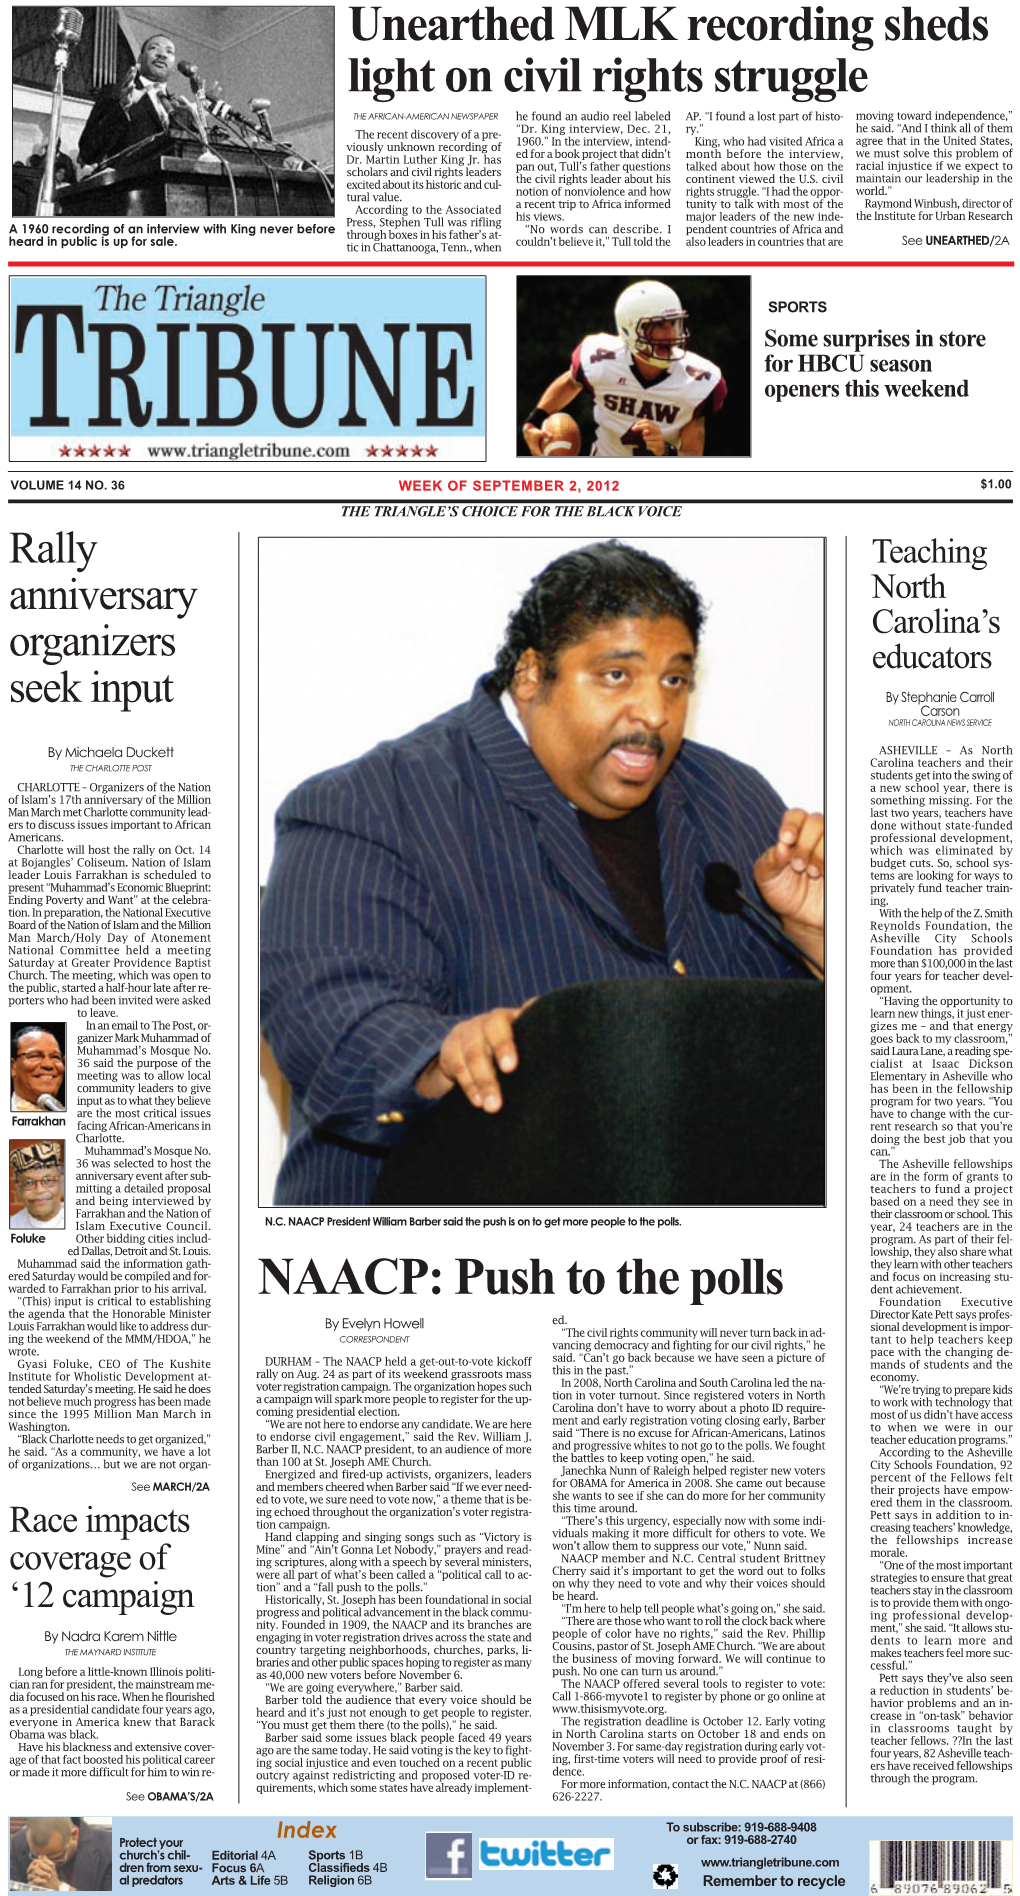 NAACP: Push to the Polls Dent Achievement